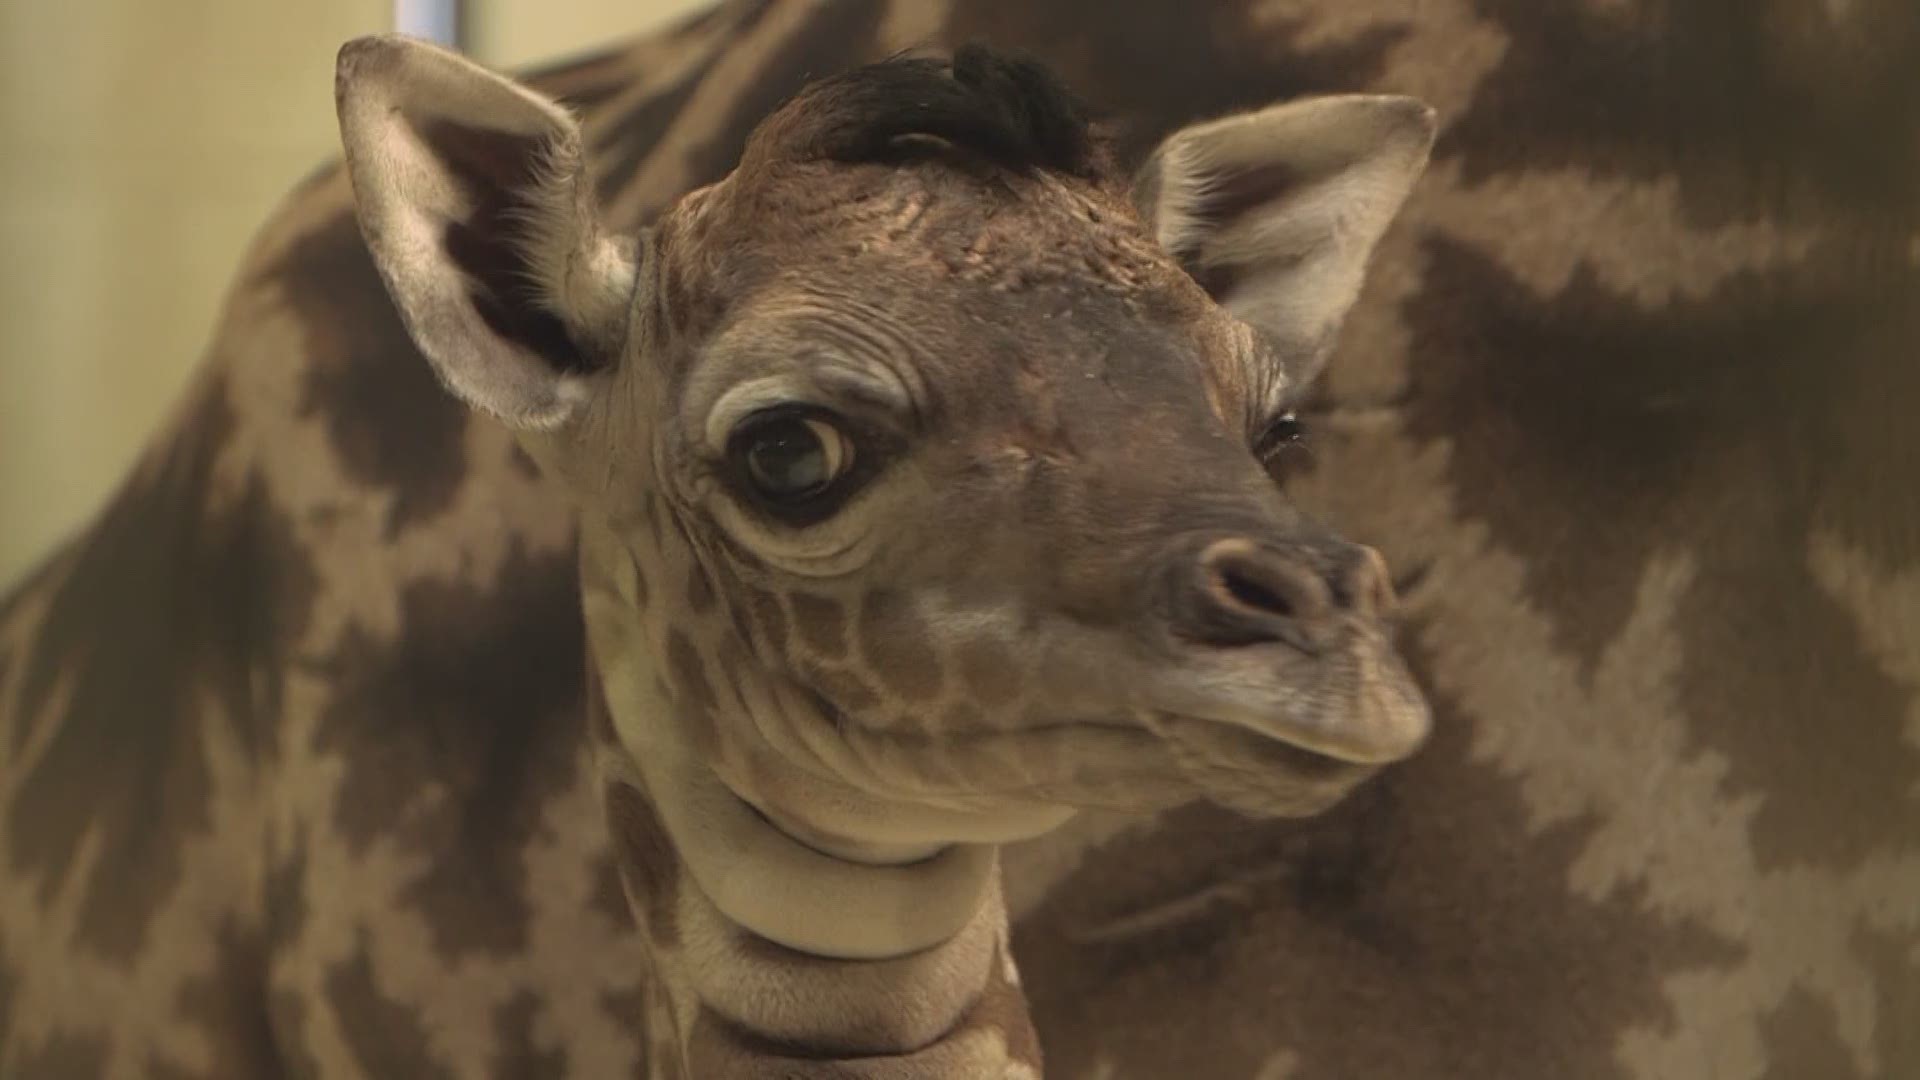 Oct. 22, 2020: So cute! There's a new baby giraffe at the Cleveland Metroparks Zoo -- and you now have the chance to help pick his name.